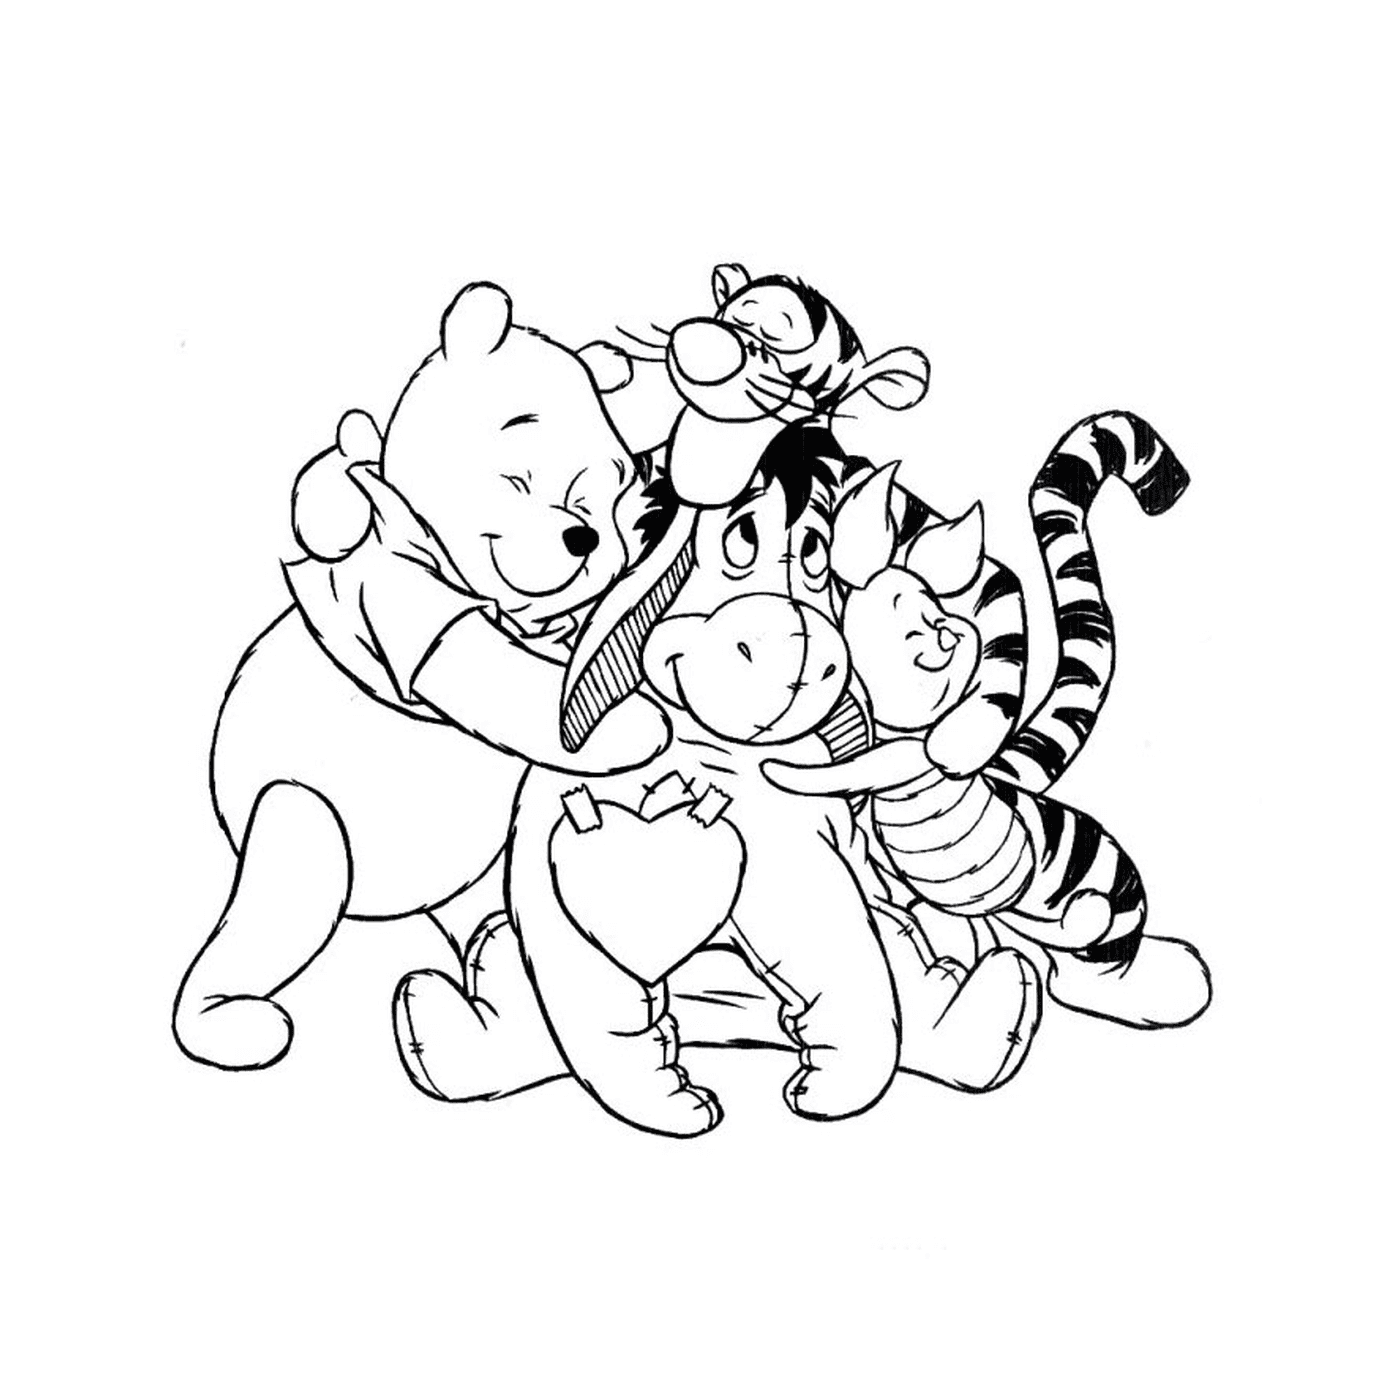  Winnie the bear and his friends 